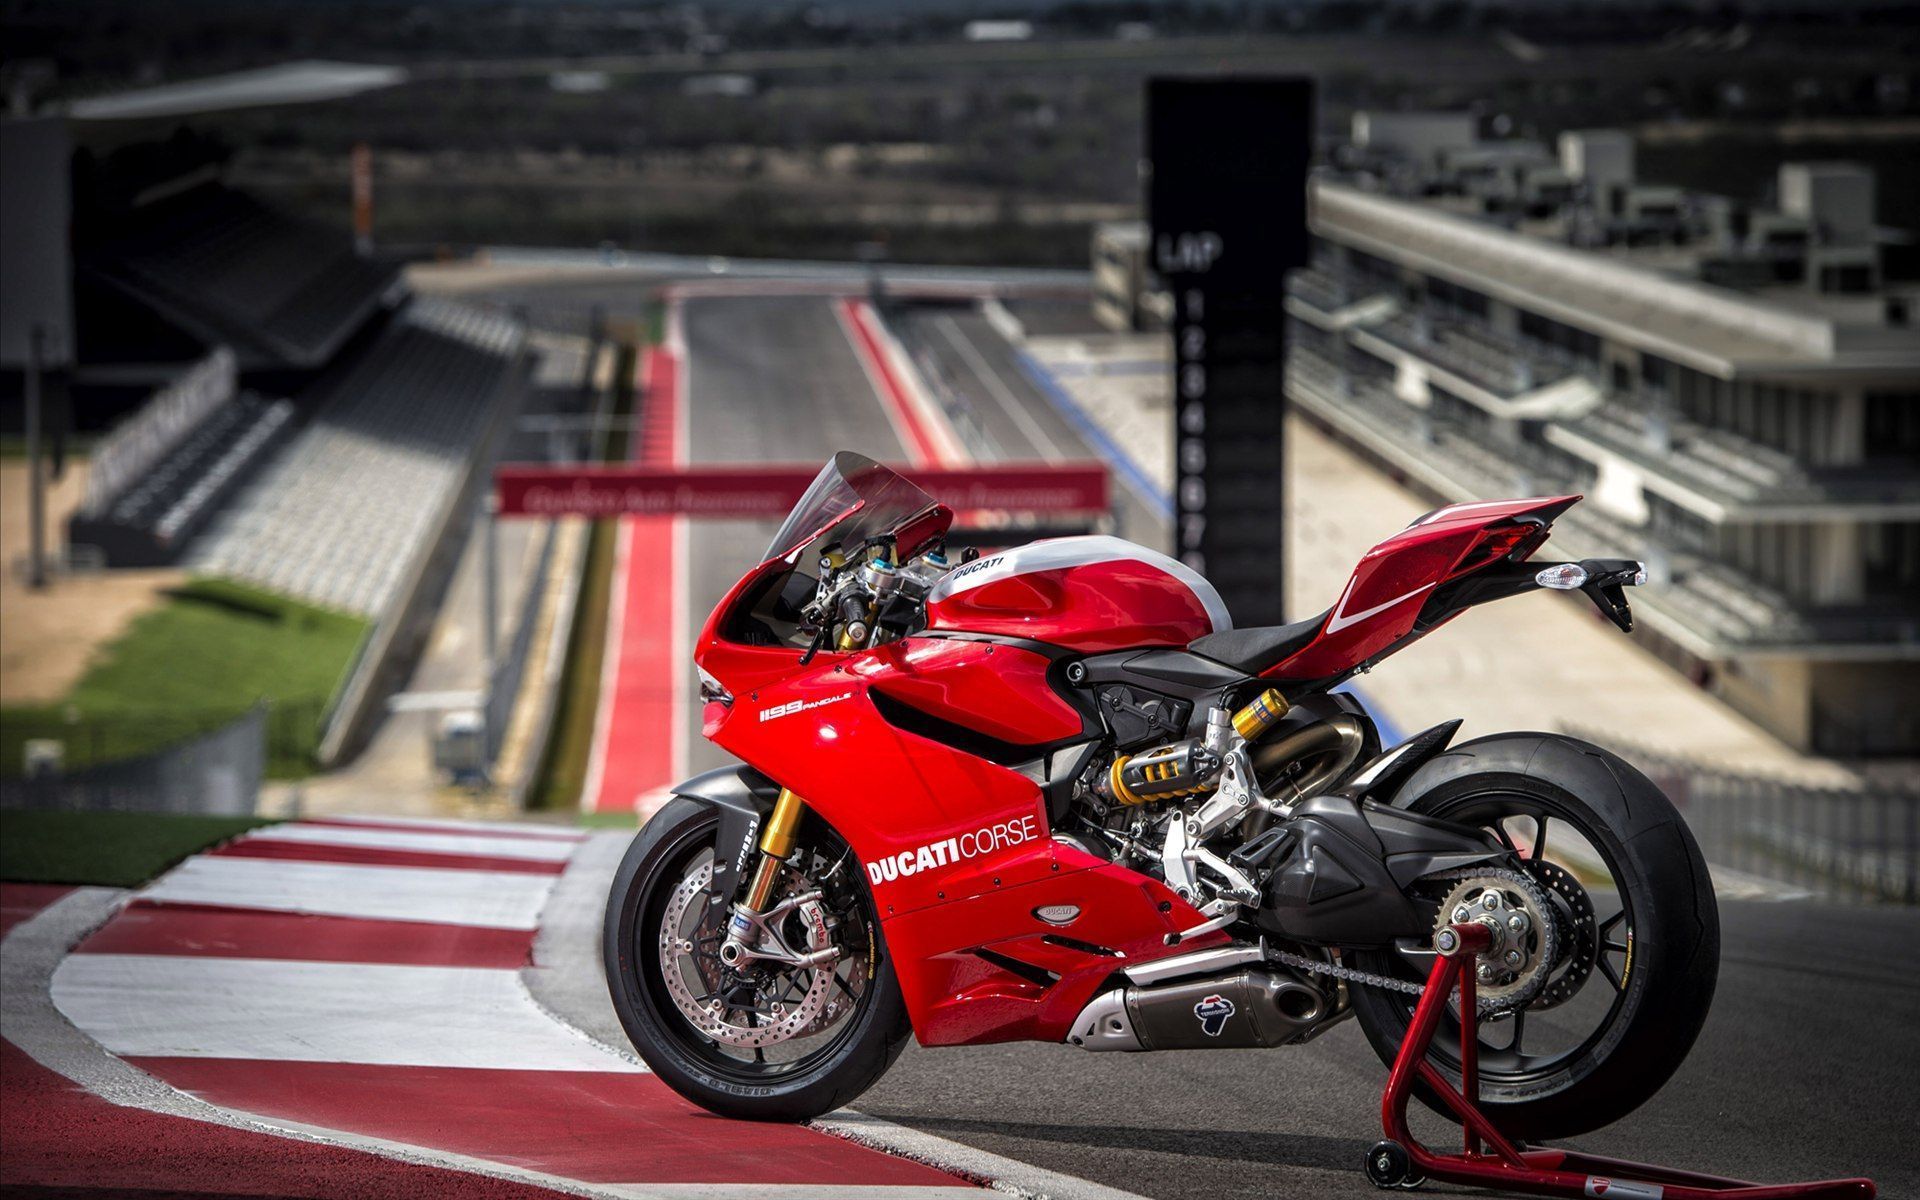 Wallpapers Tagged With DUCATI DUCATI HD Wallpapers